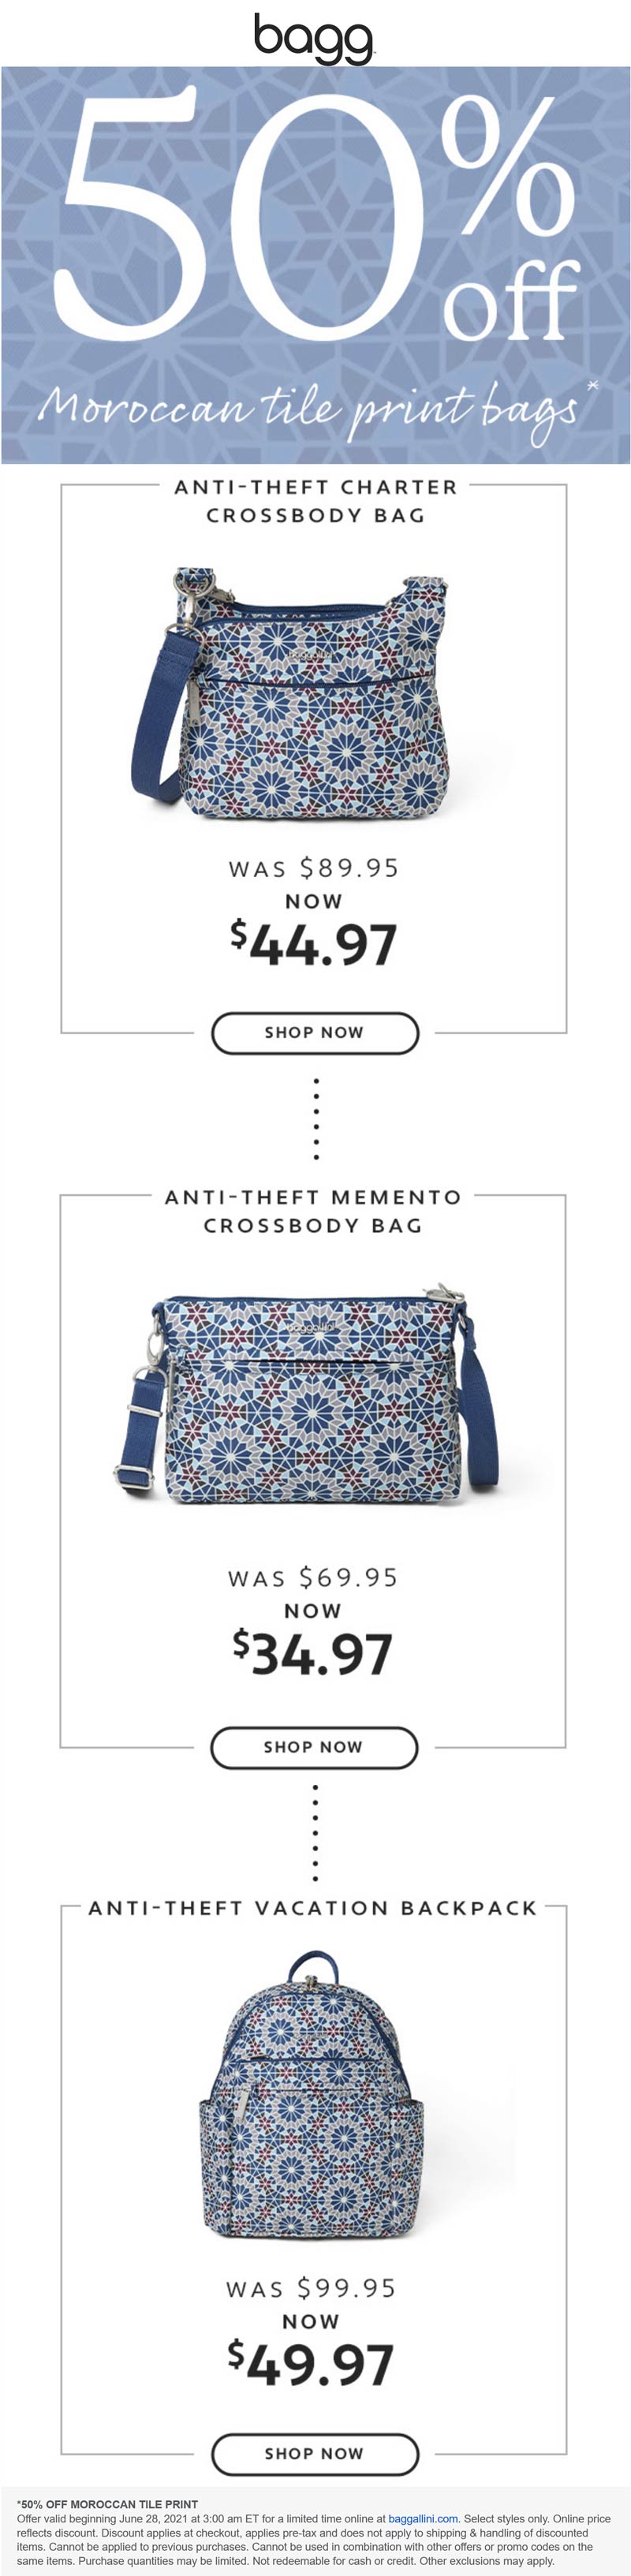 baggallini stores Coupon  50% off Moroccan tile print bags today at baggallini #baggallini 